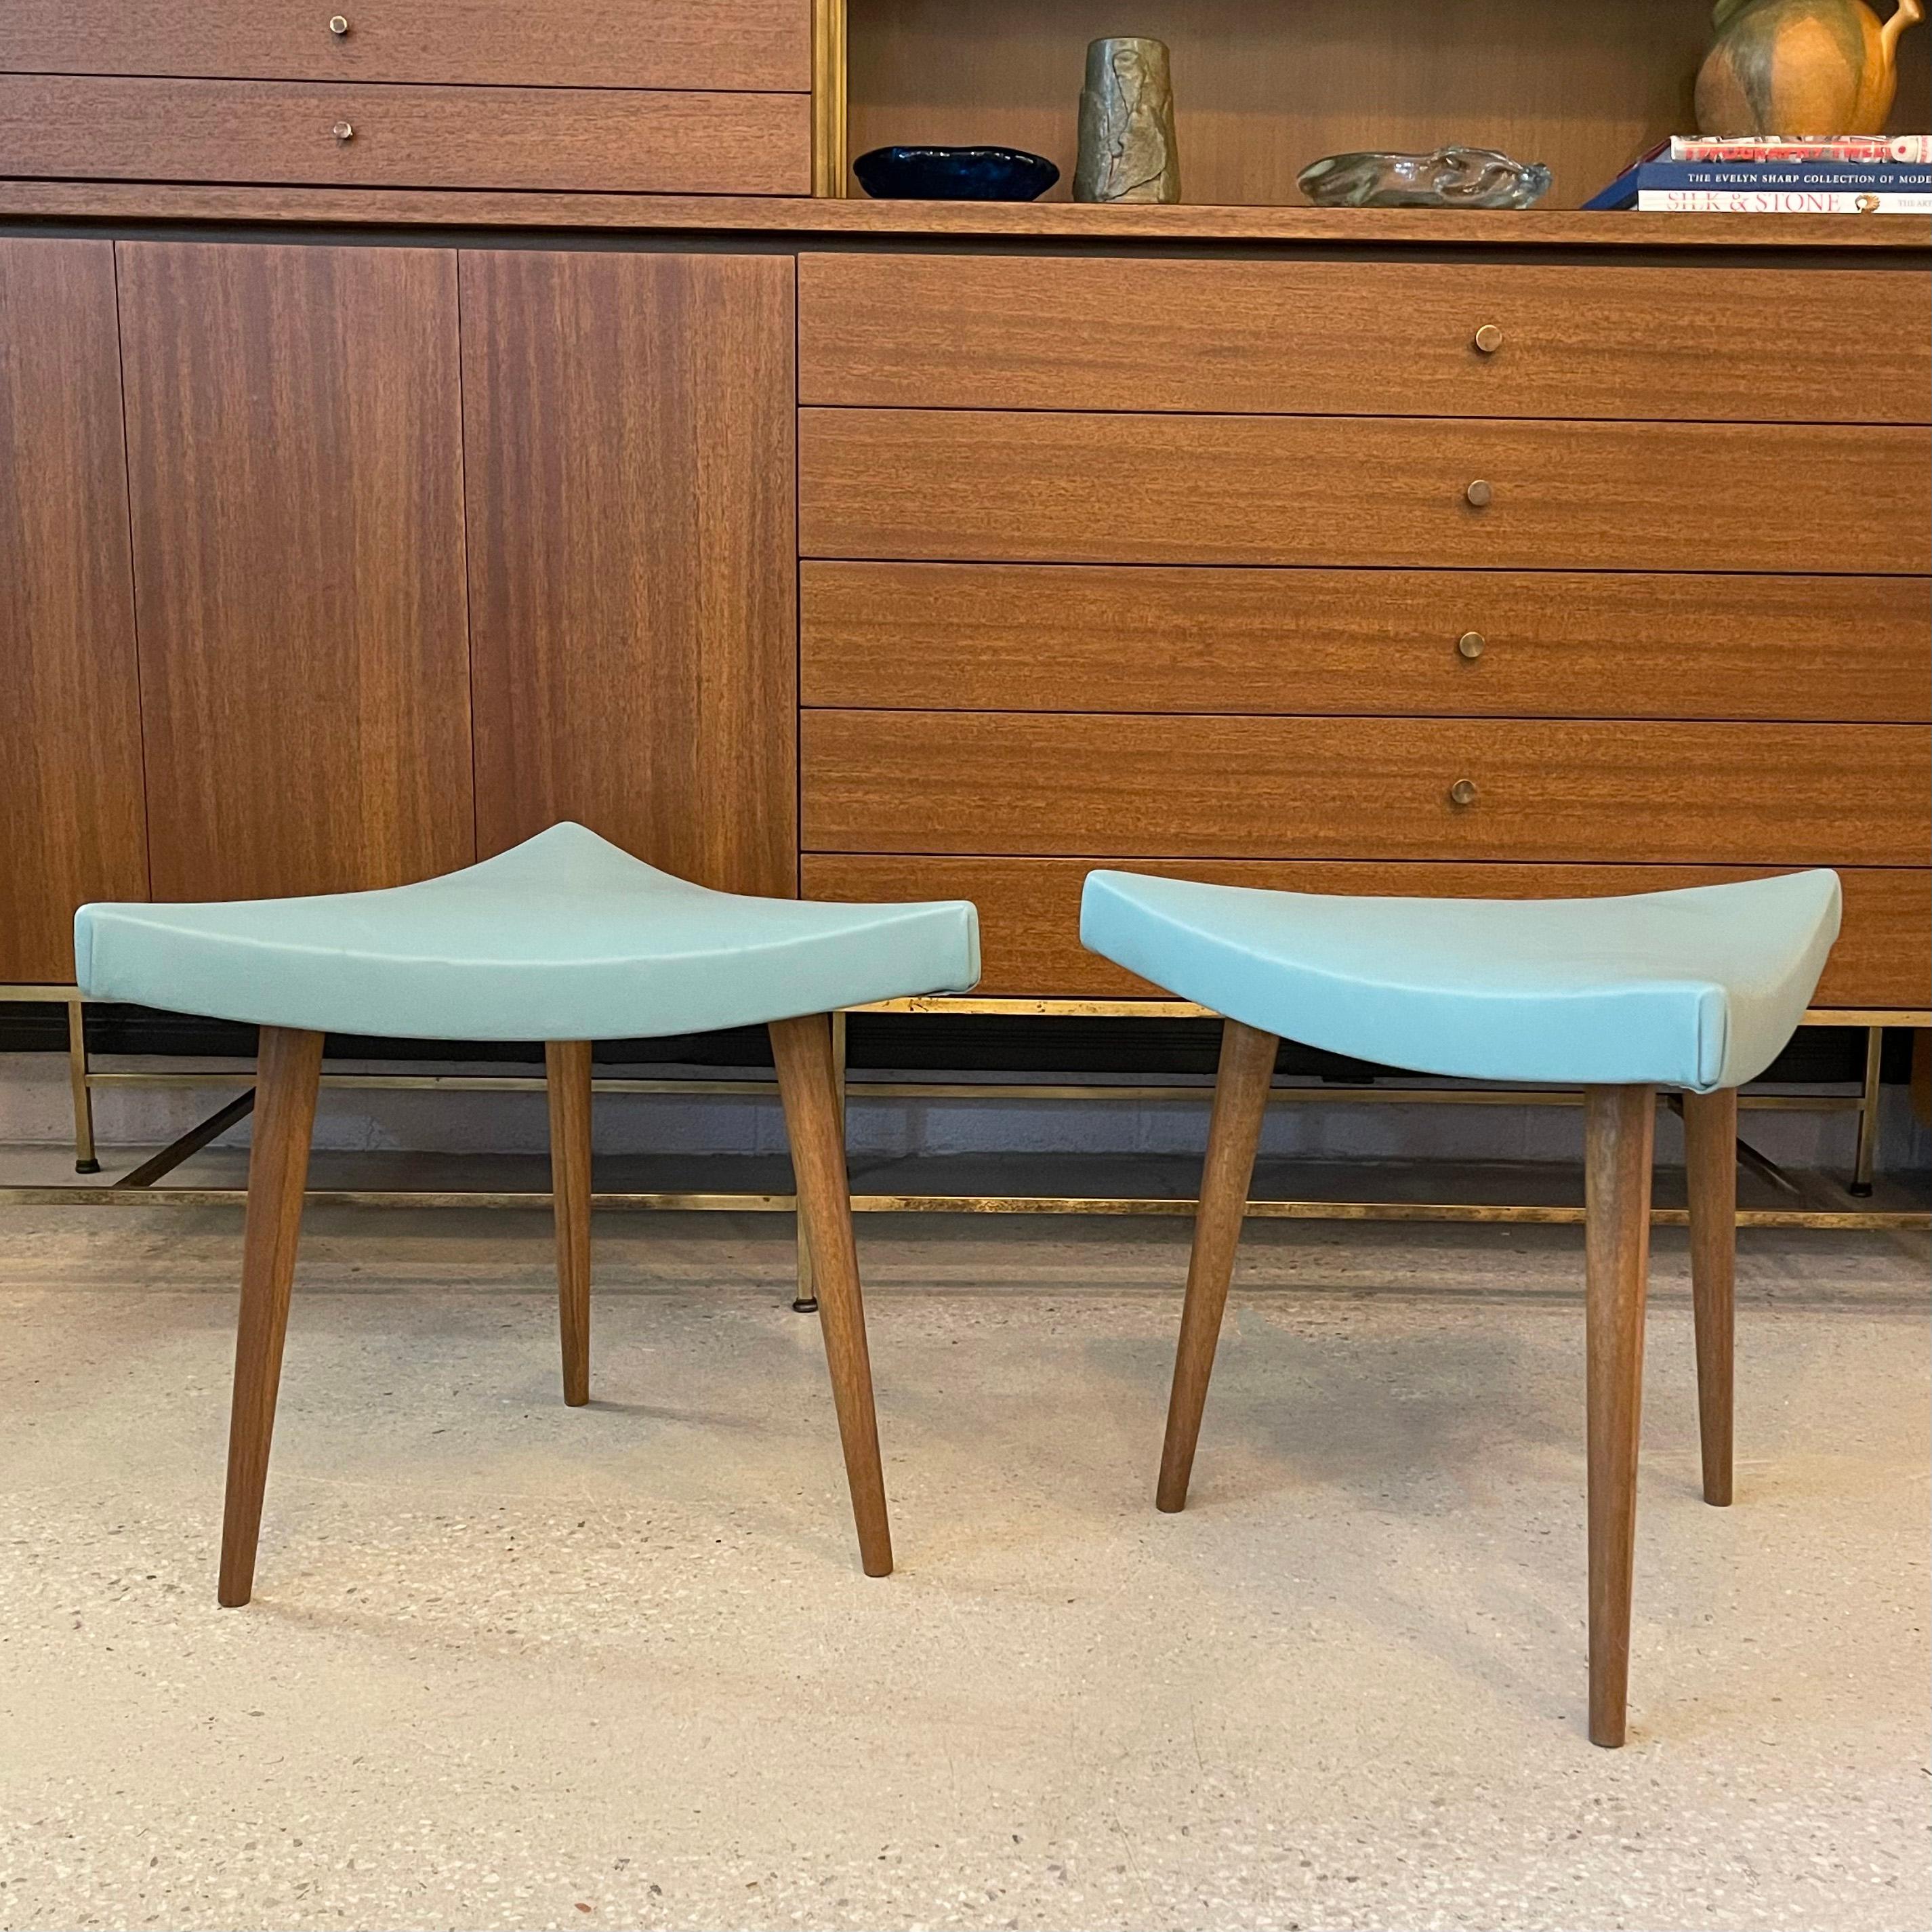 cFsignature Mid-Century Modern Style Triangular Stools In Good Condition For Sale In Brooklyn, NY